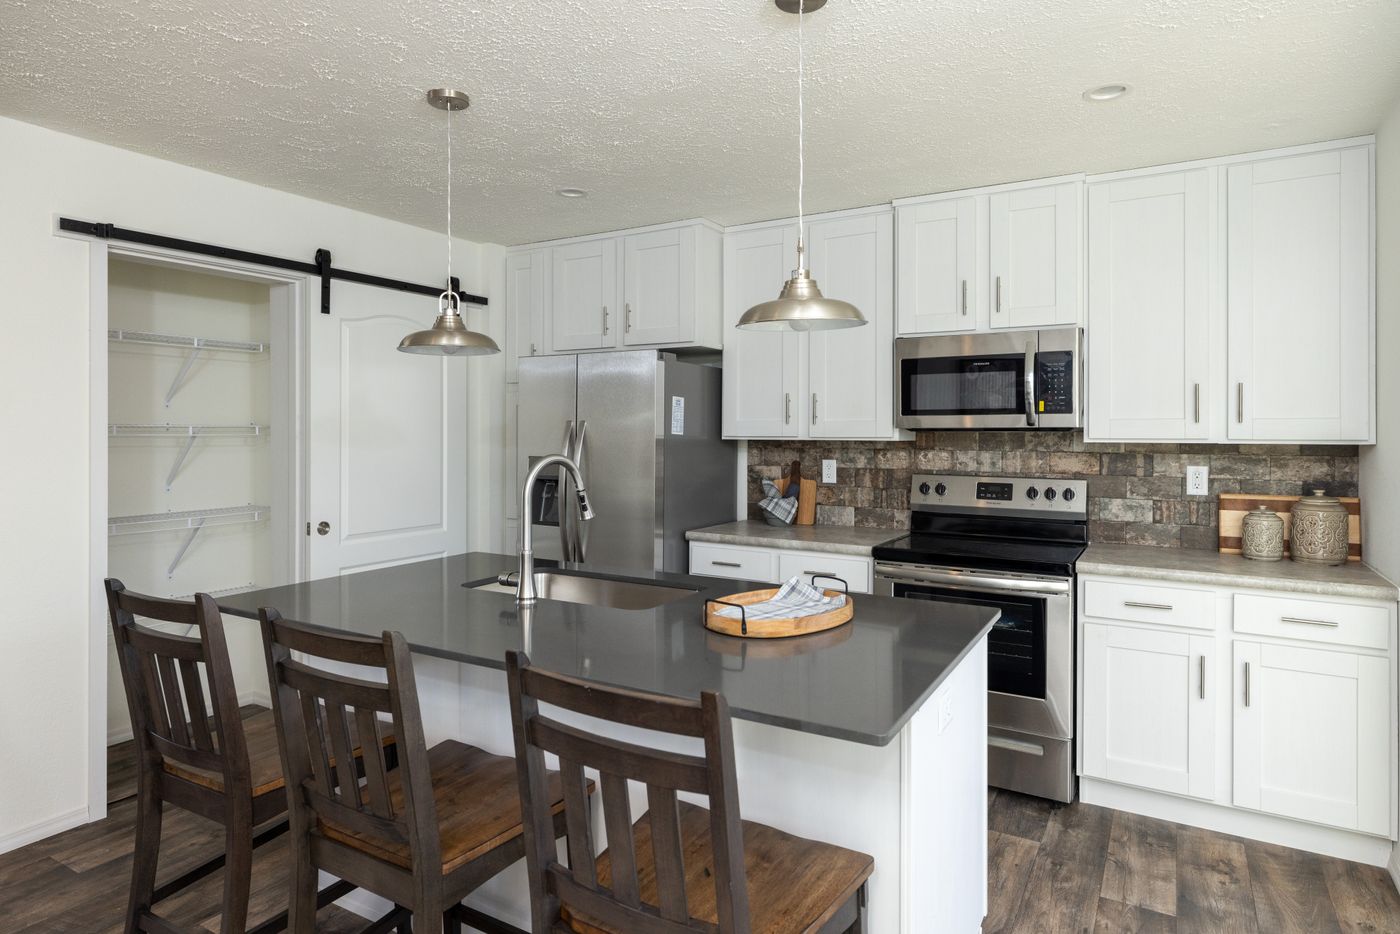 The THE WASHINGTON MOD Kitchen. This Modular Home features 3 bedrooms and 2 baths.